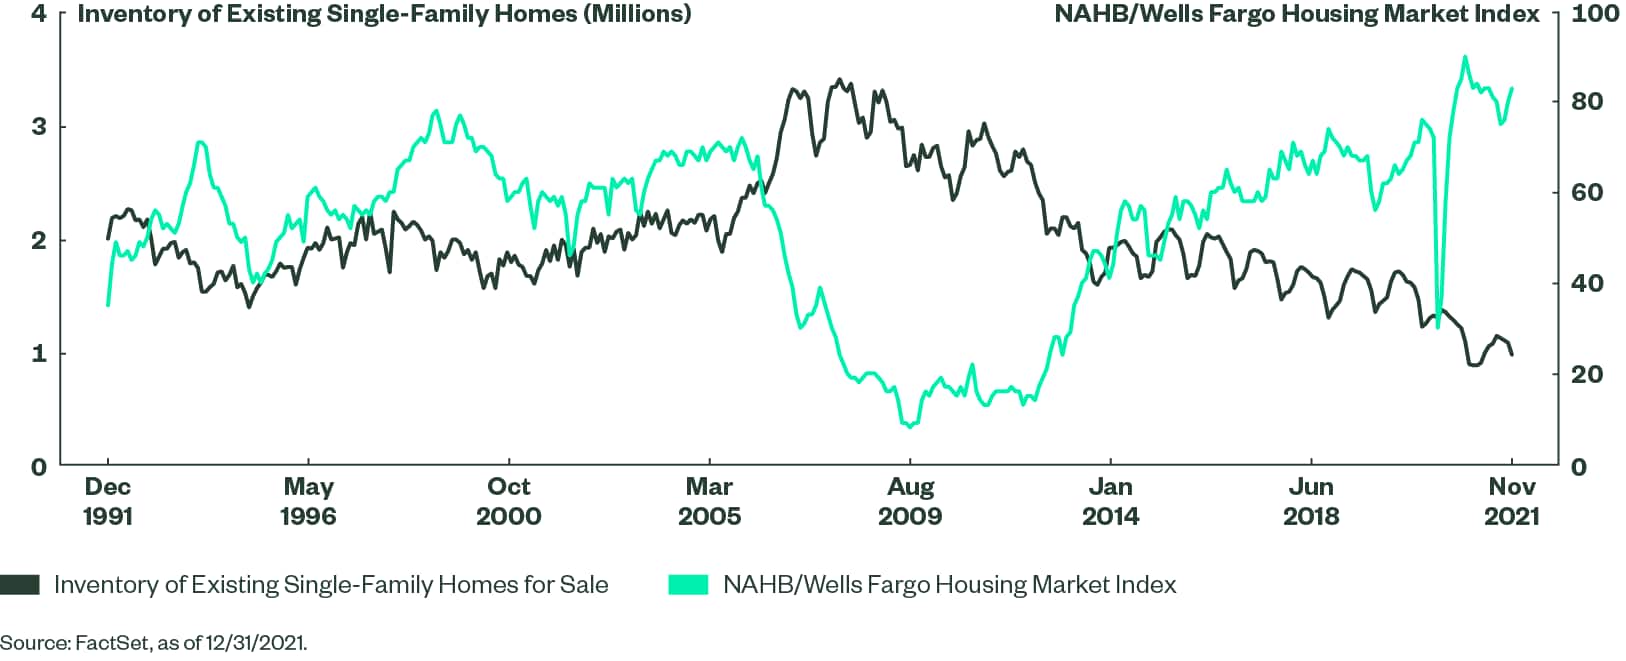 Low Existing Home Inventory and Elevated Homebuilder Sentiment